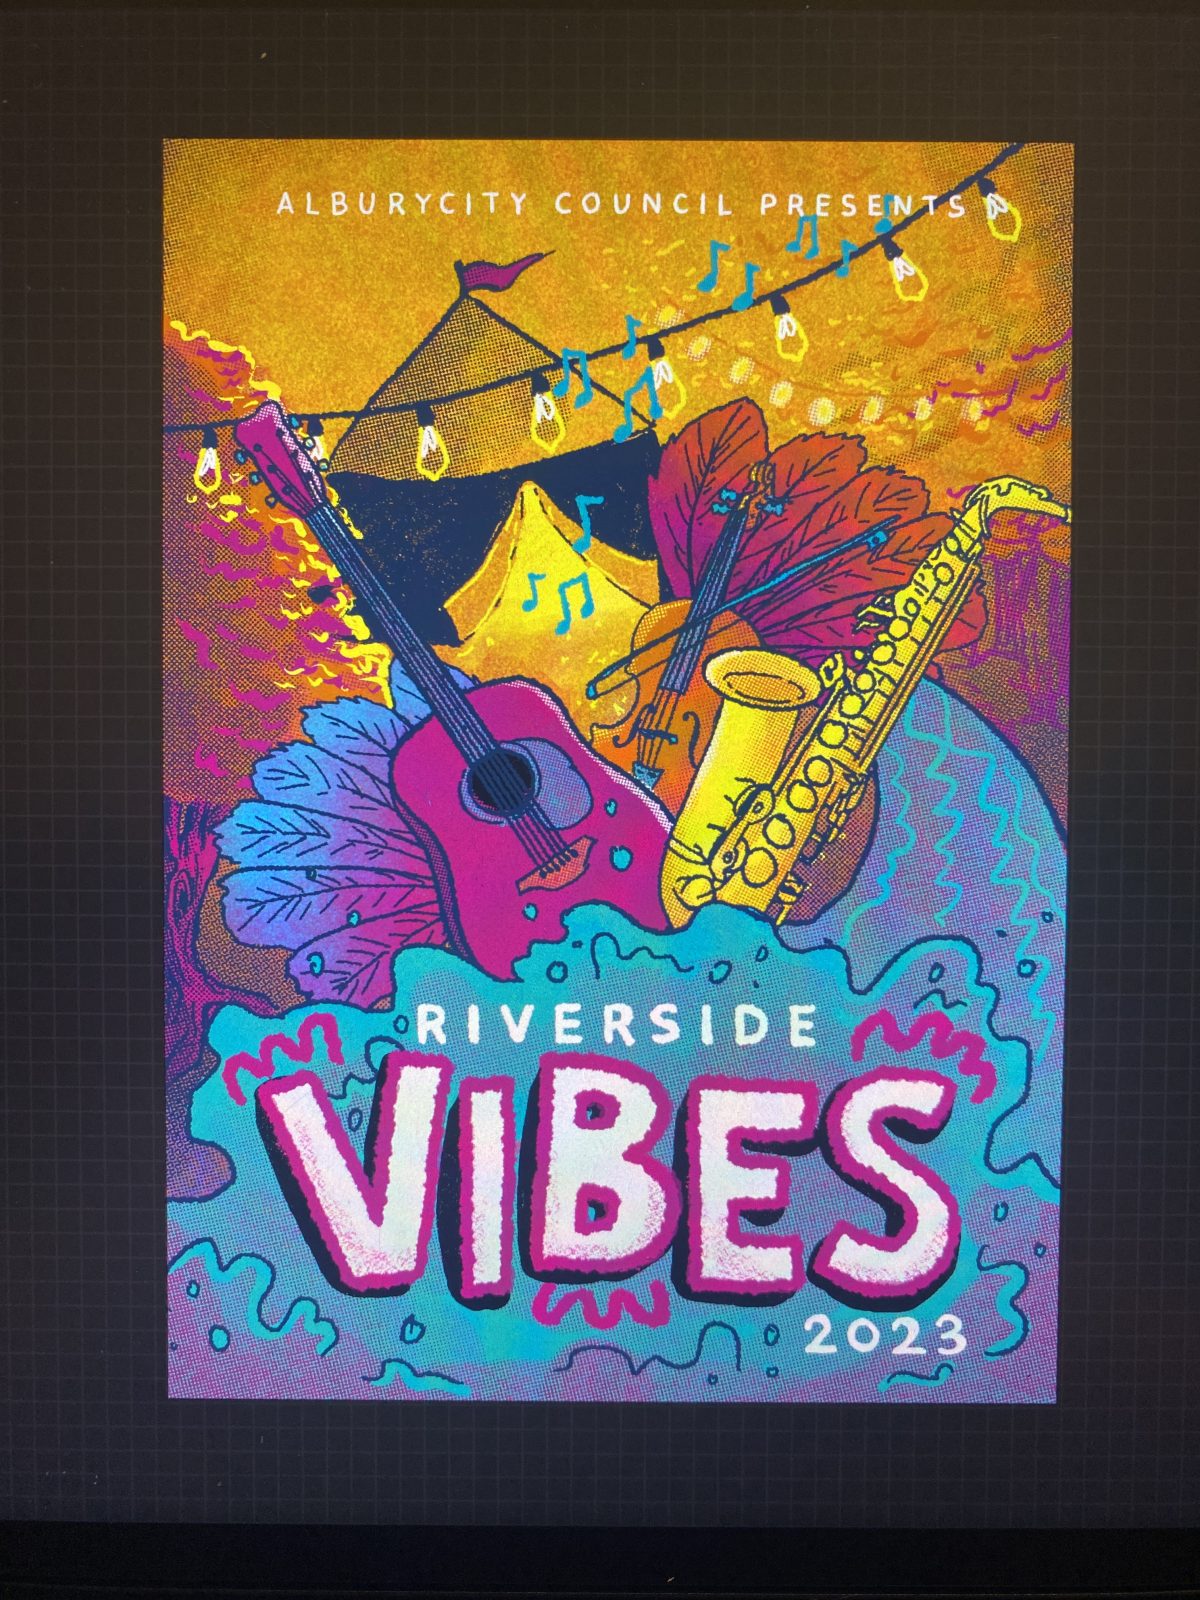 Poster illustration work for Albury City Council Riverside Vibes 2023